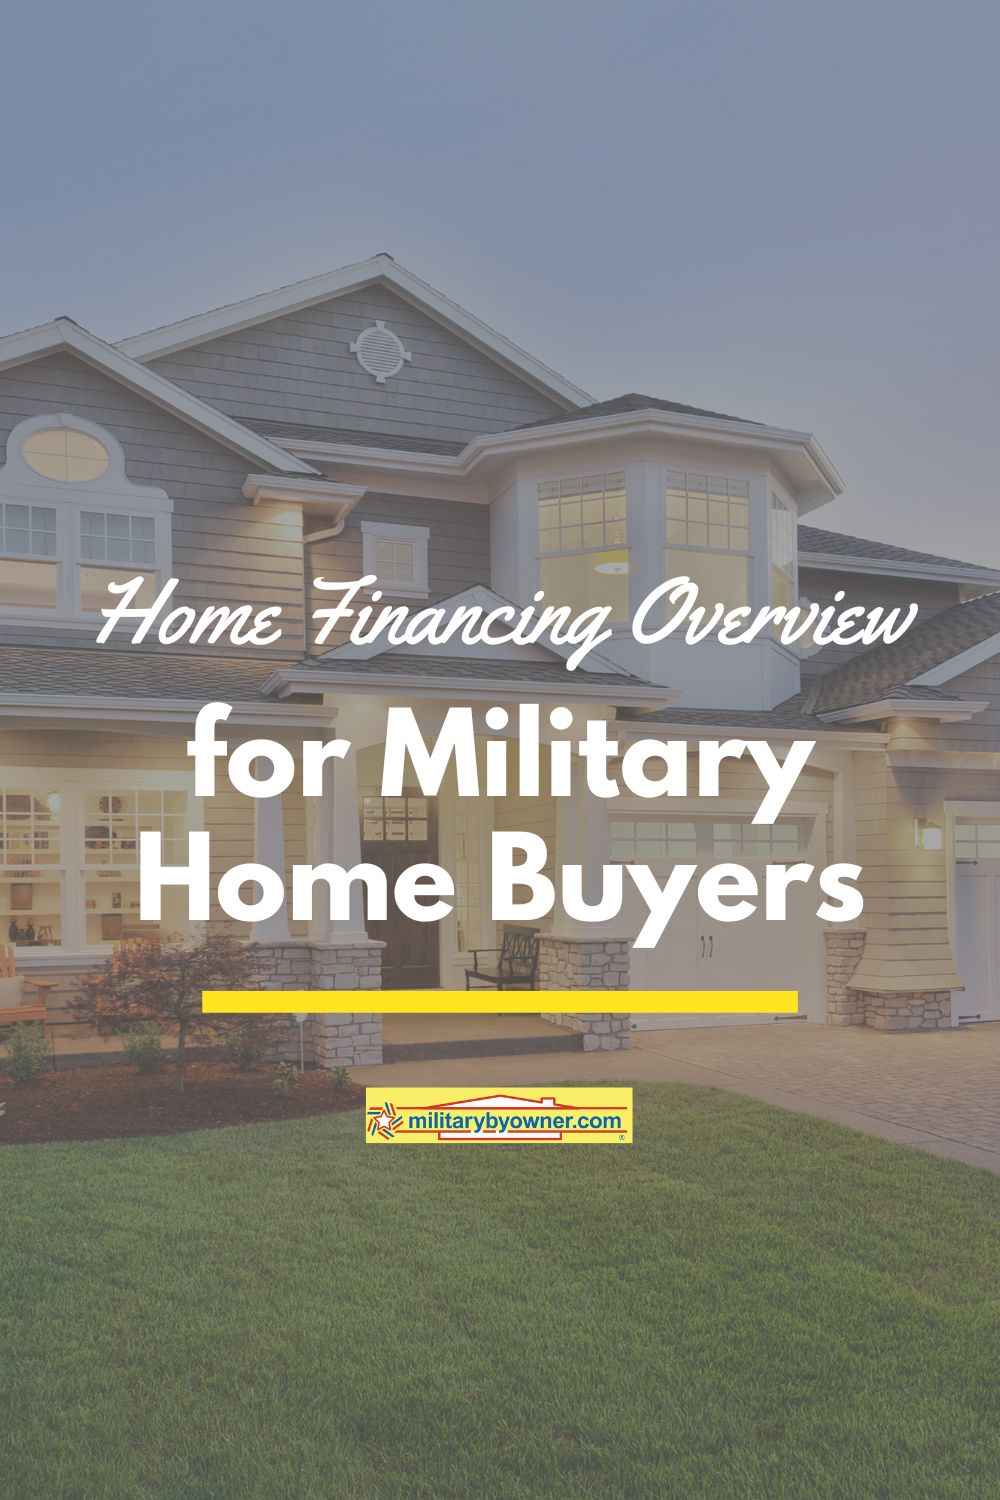 Home_Financing_Overview_for_Military_Home_Buyers